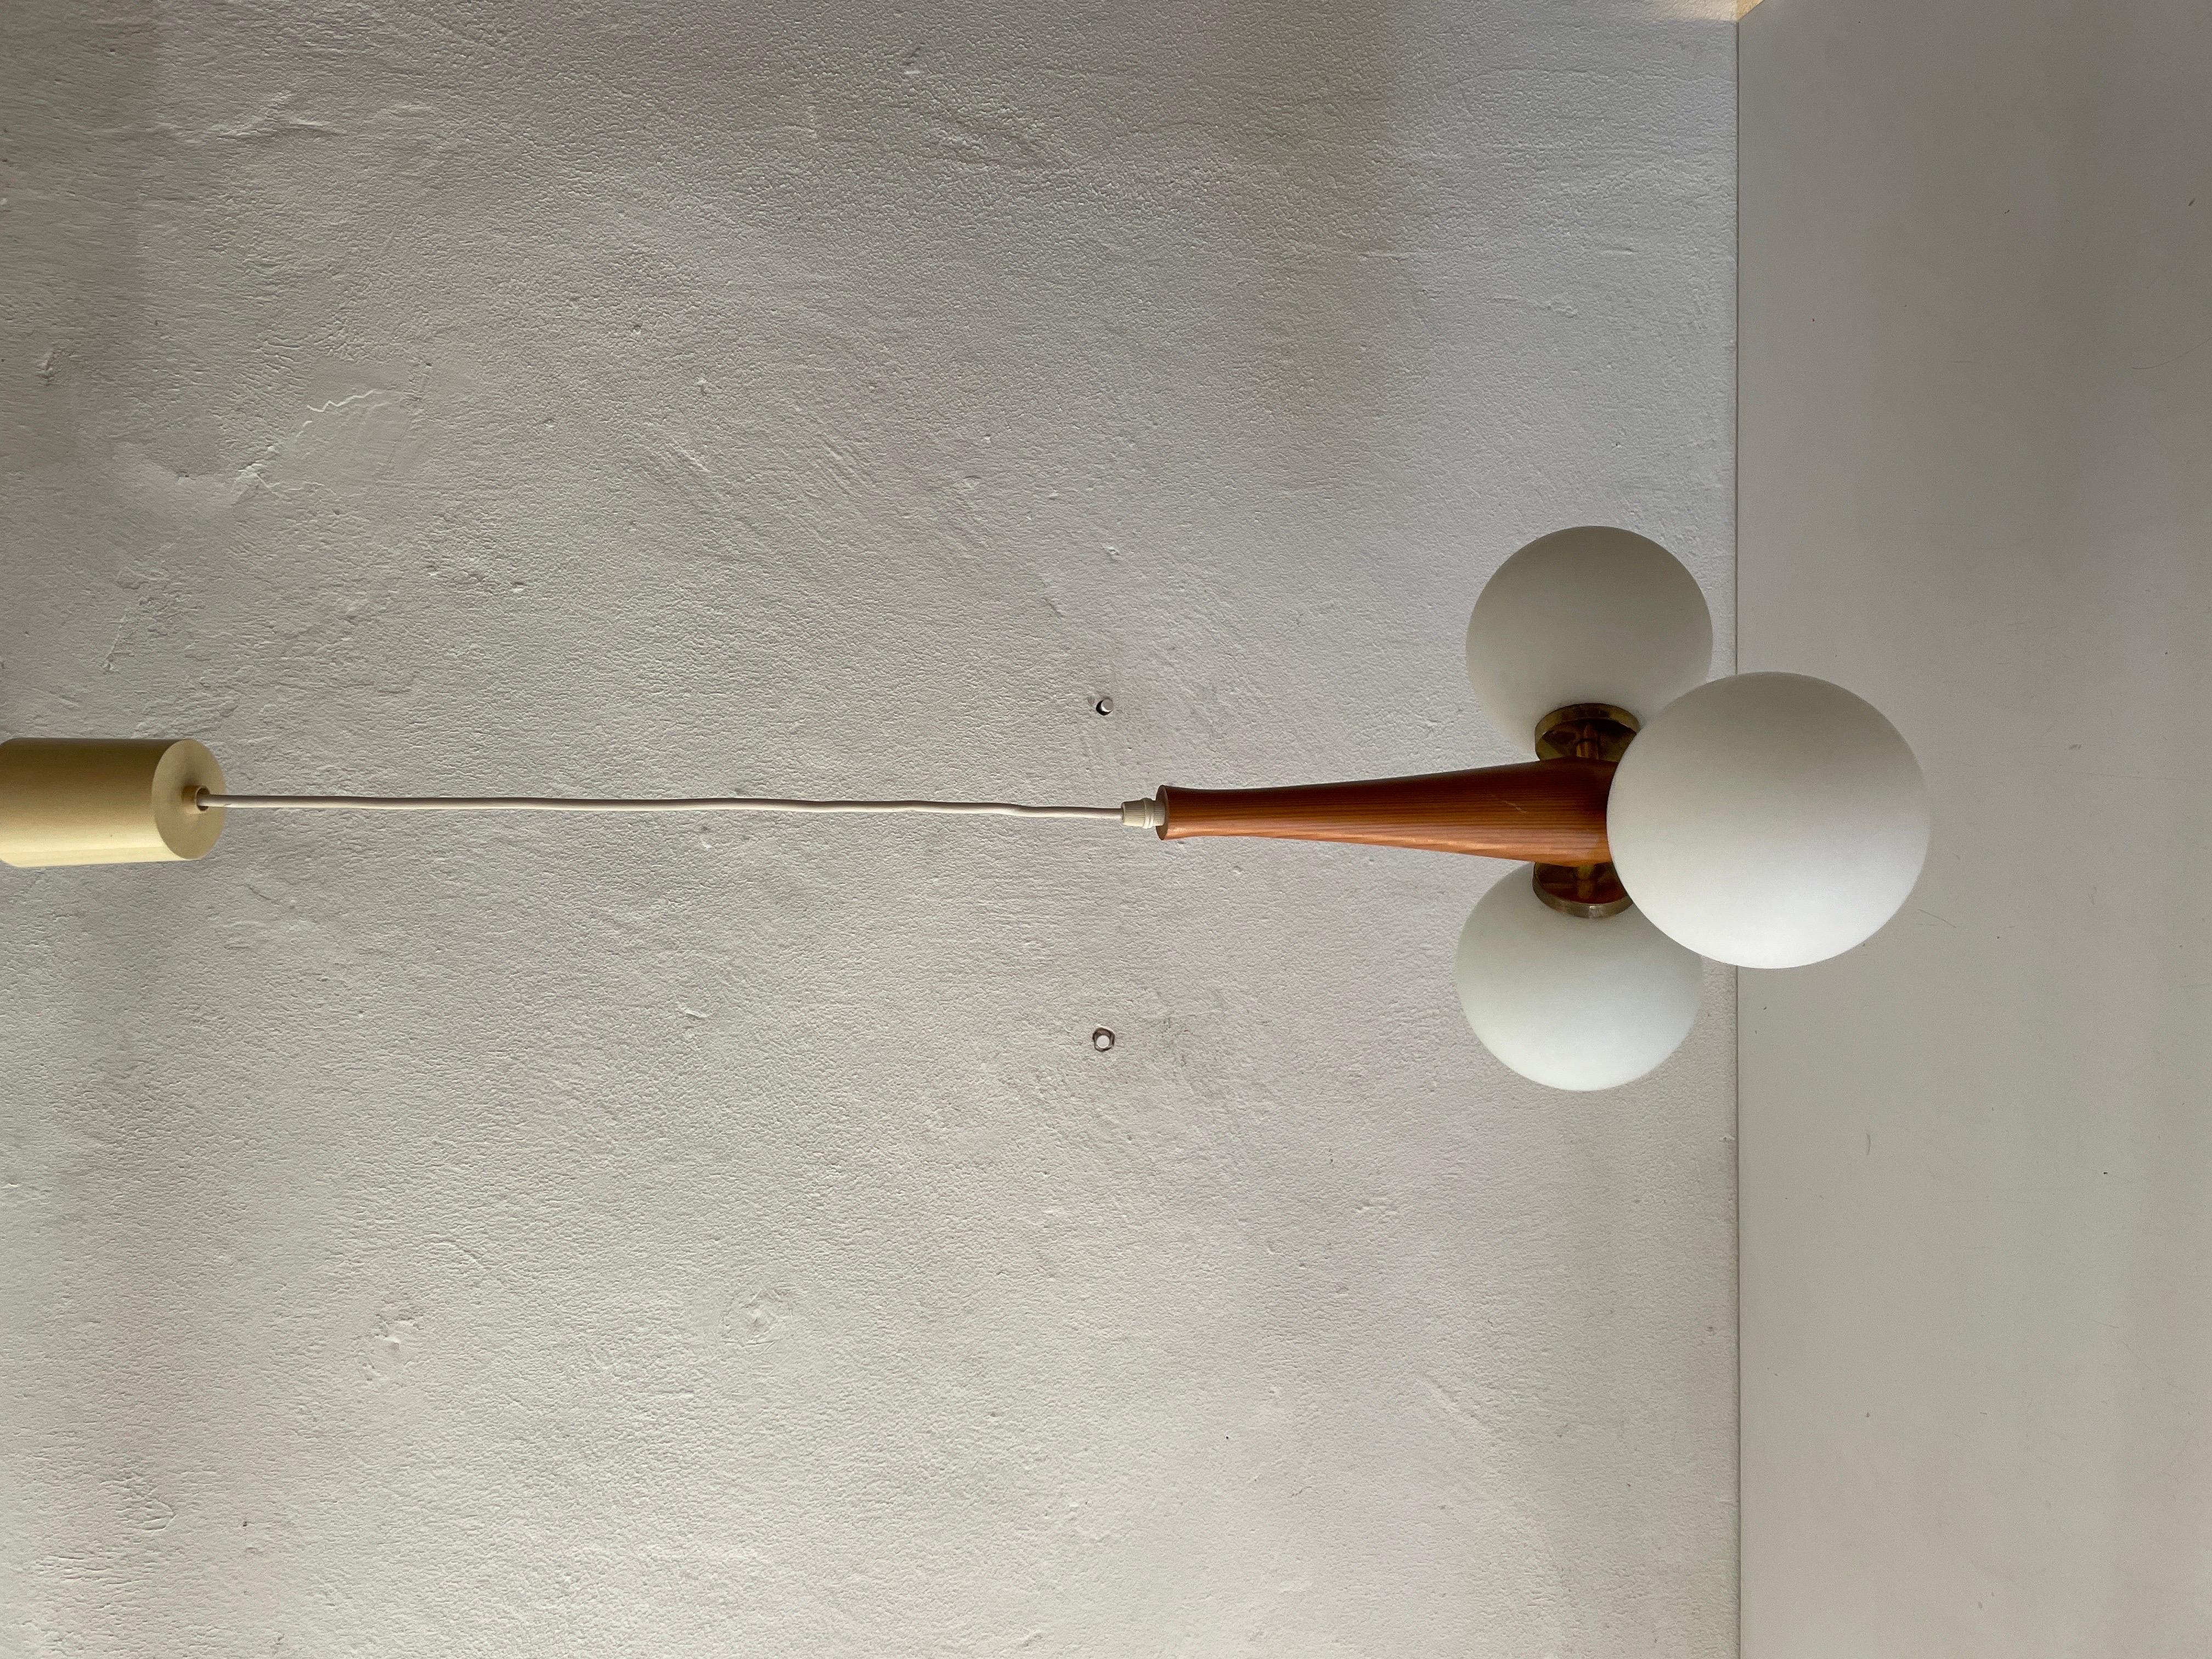 3 Opal Ball Glass and Wood Body Atomic Ceiling Lamp, 1970s, Germany For Sale 1